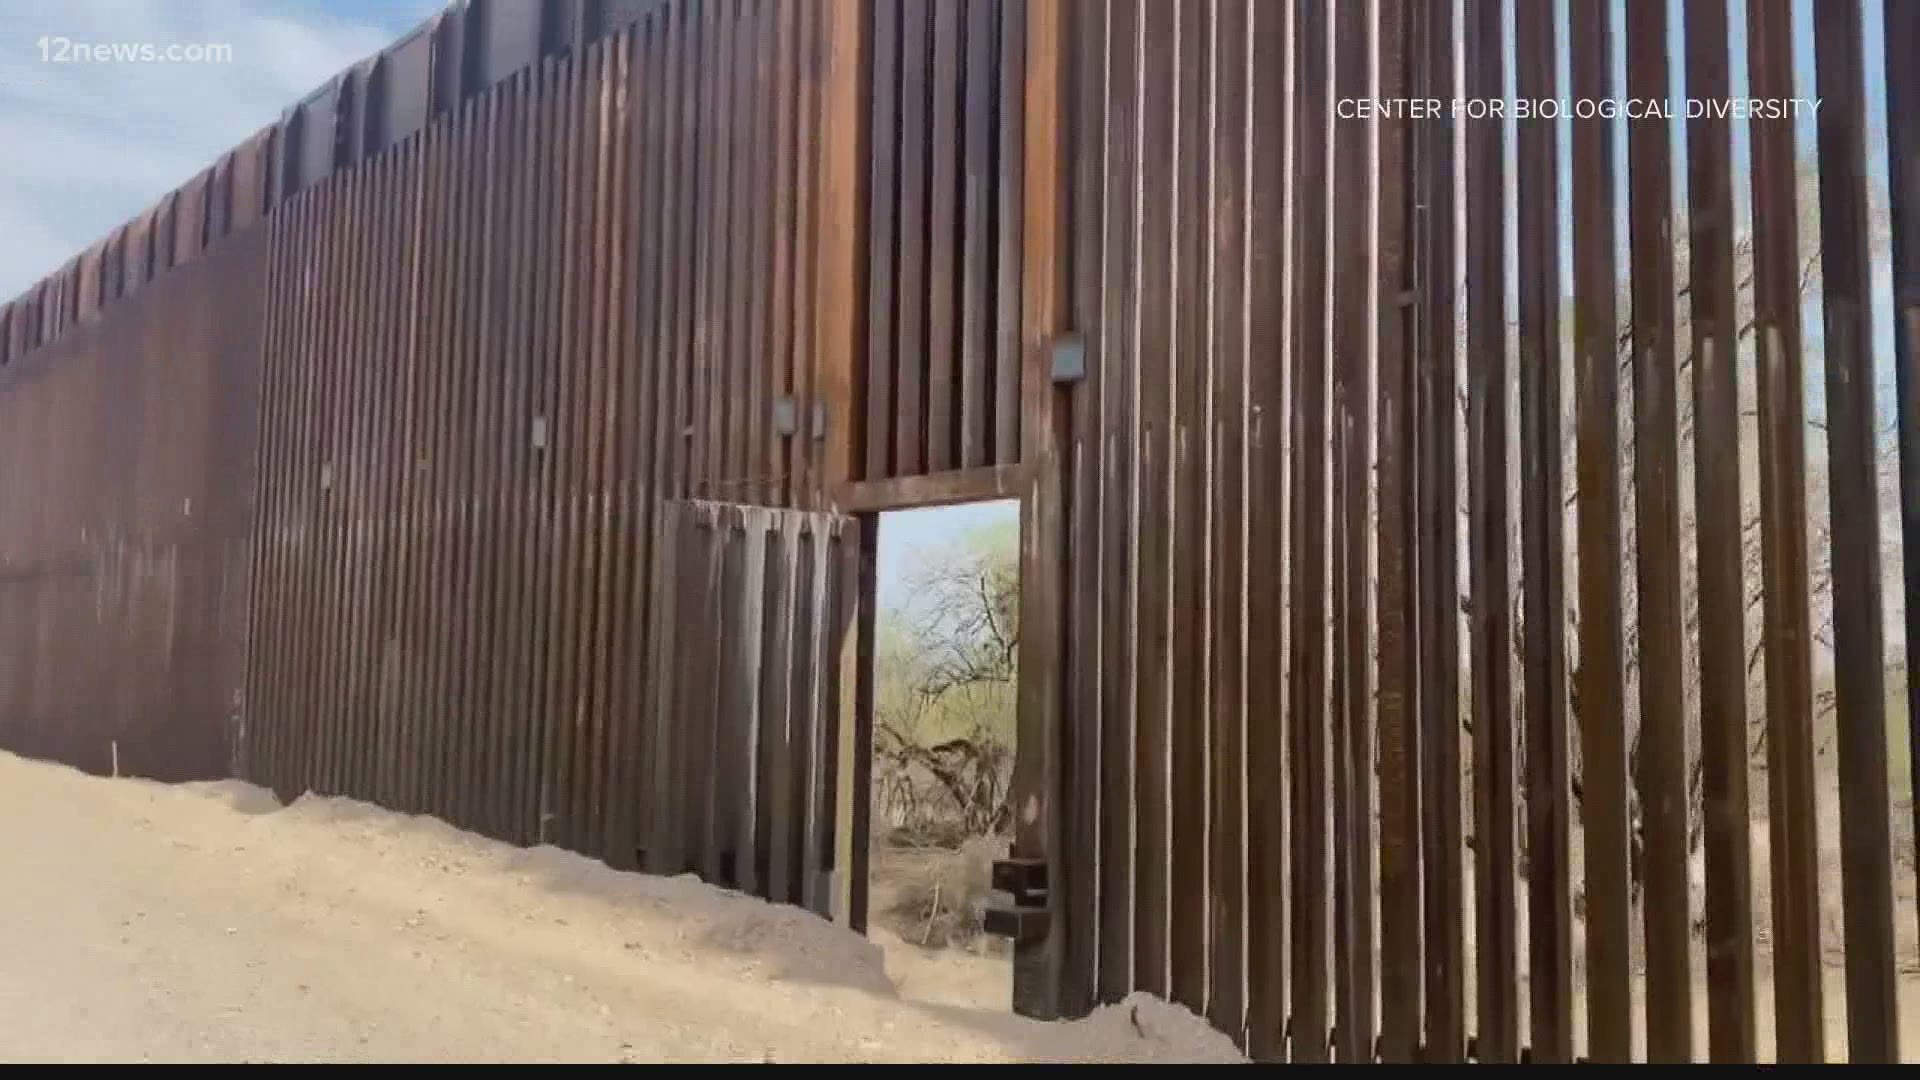 Open gates along the border wall are common during monsoon season. Anti-wall activists say the open gates demonstrate that the wall is just a political stunt.